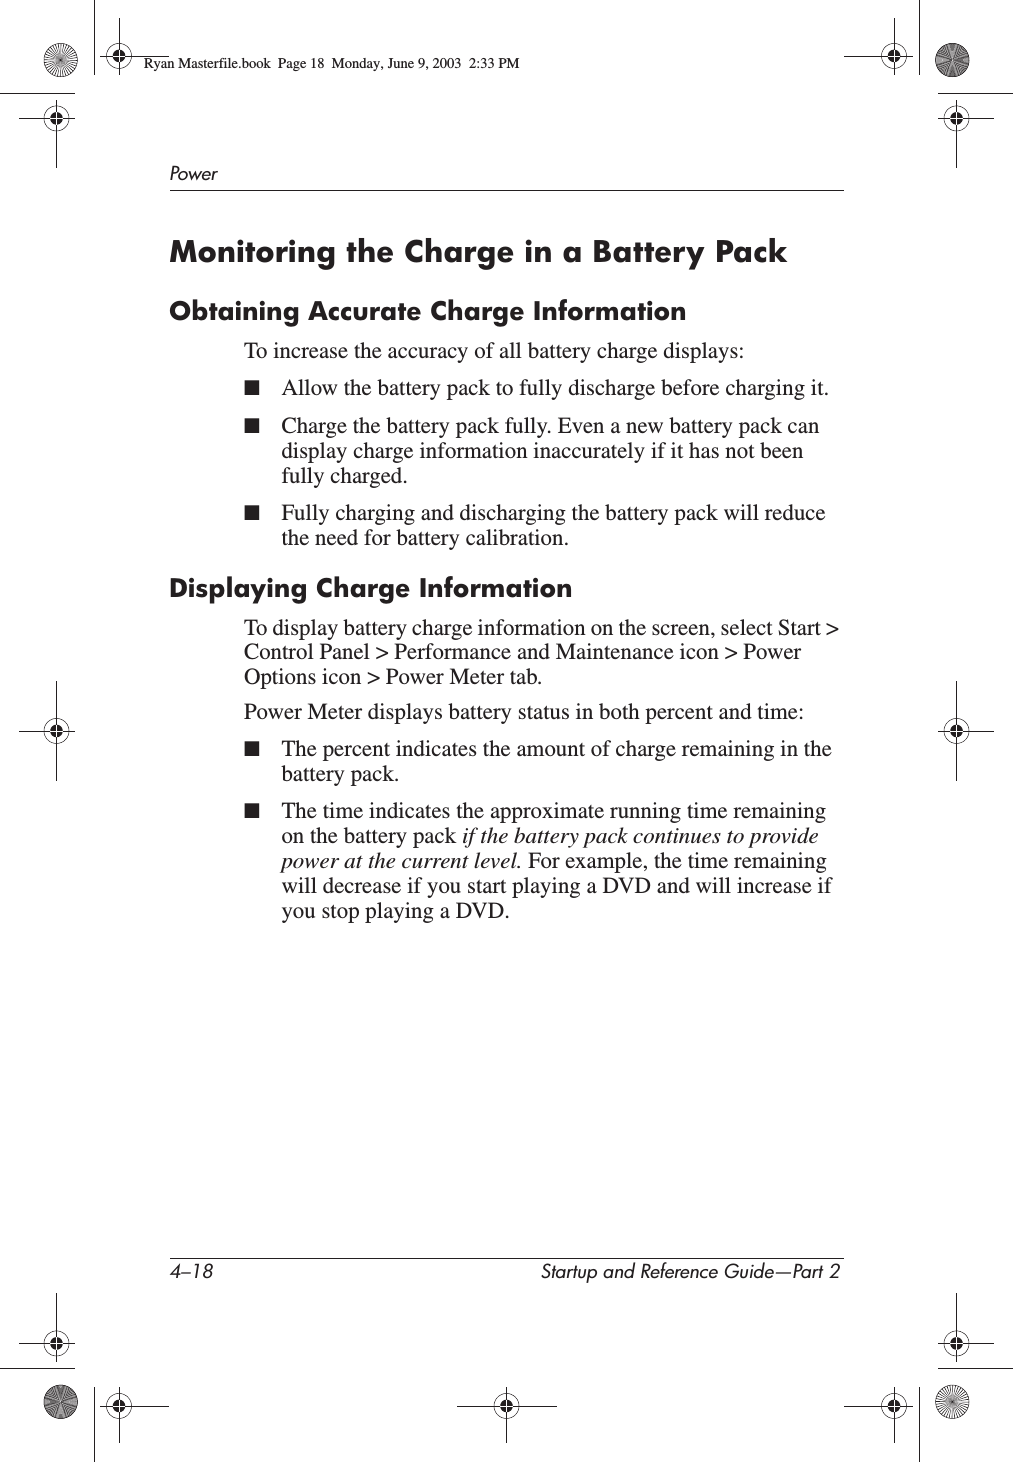 4–18 Startup and Reference Guide—Part 2PowerMonitoring the Charge in a Battery PackObtaining Accurate Charge InformationTo increase the accuracy of all battery charge displays:■Allow the battery pack to fully discharge before charging it.■Charge the battery pack fully. Even a new battery pack can display charge information inaccurately if it has not been fully charged.■Fully charging and discharging the battery pack will reduce the need for battery calibration.Displaying Charge InformationTo display battery charge information on the screen, select Start &gt; Control Panel &gt; Performance and Maintenance icon &gt; Power Options icon &gt; Power Meter tab.Power Meter displays battery status in both percent and time:■The percent indicates the amount of charge remaining in the battery pack.■The time indicates the approximate running time remaining on the battery pack if the battery pack continues to provide power at the current level. For example, the time remaining will decrease if you start playing a DVD and will increase if you stop playing a DVD.Ryan Masterfile.book  Page 18  Monday, June 9, 2003  2:33 PM